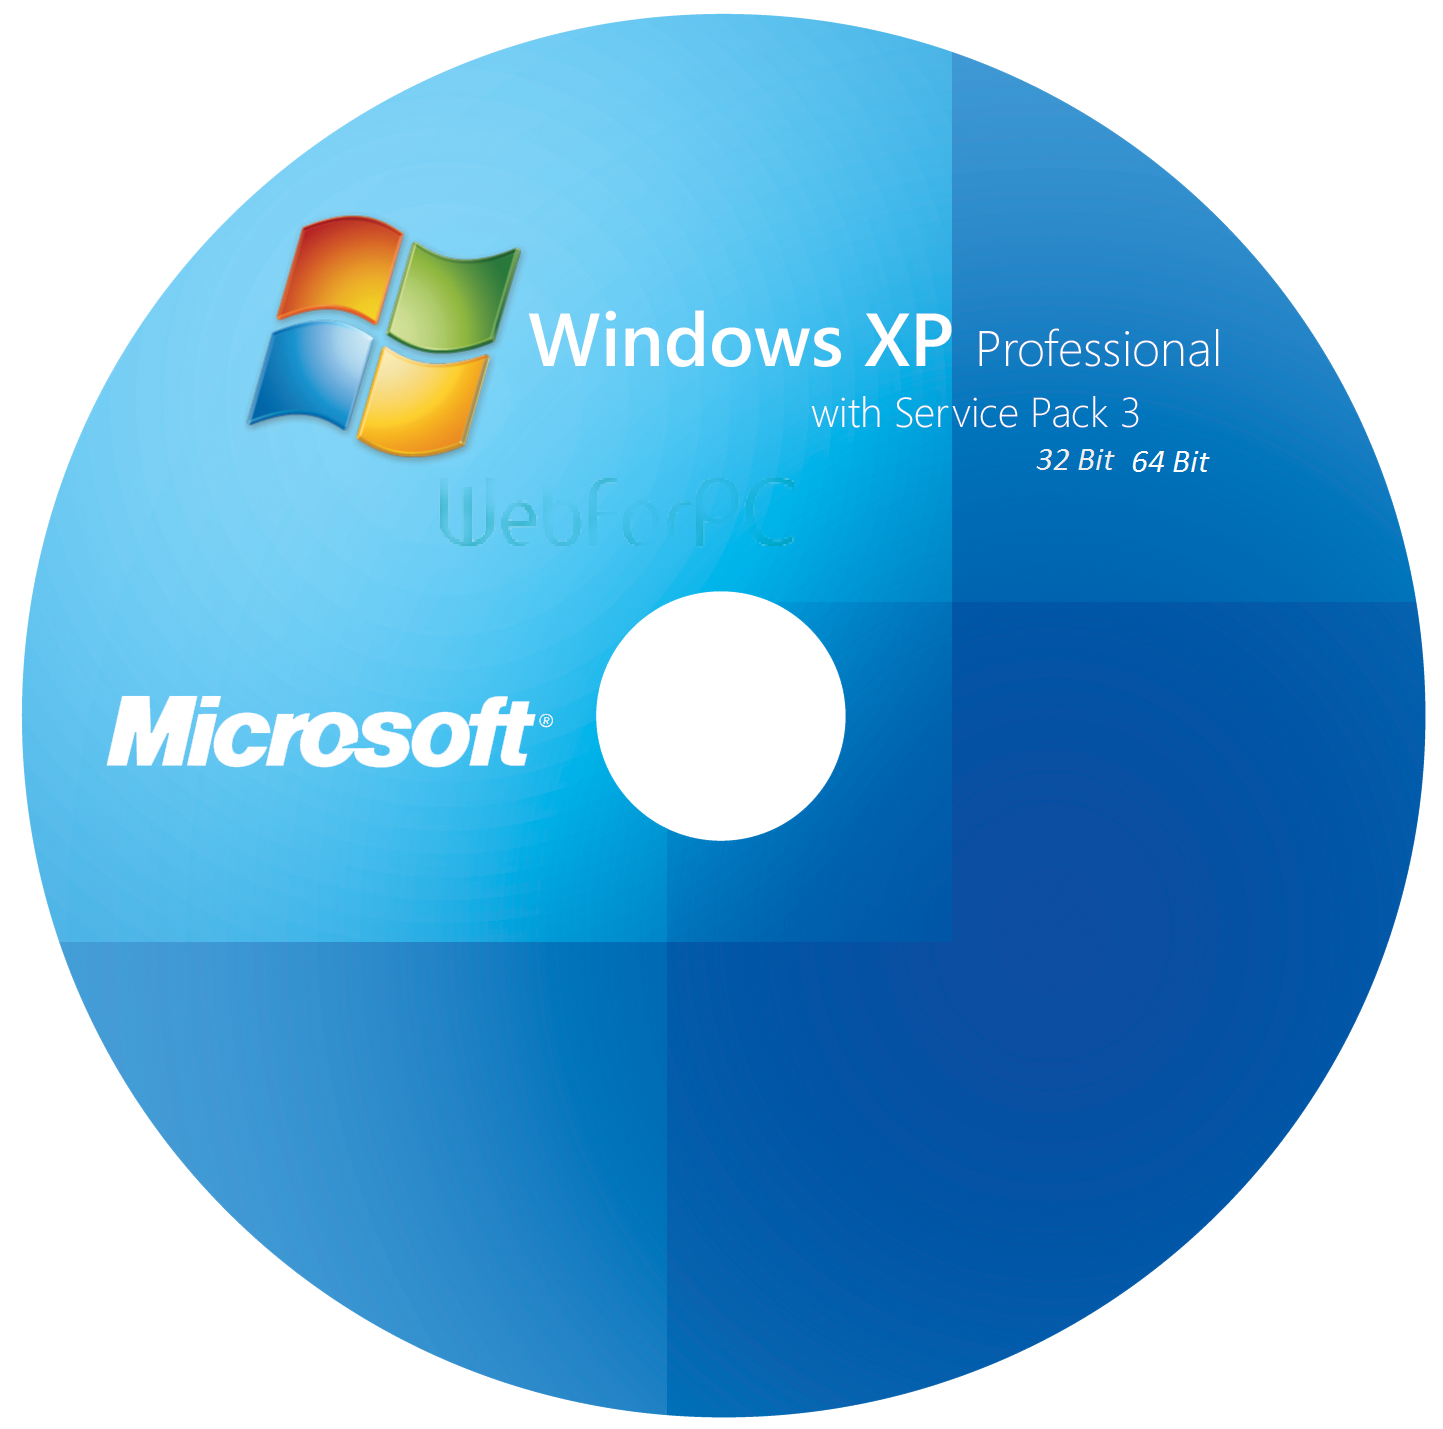 windows 7 disc image iso download